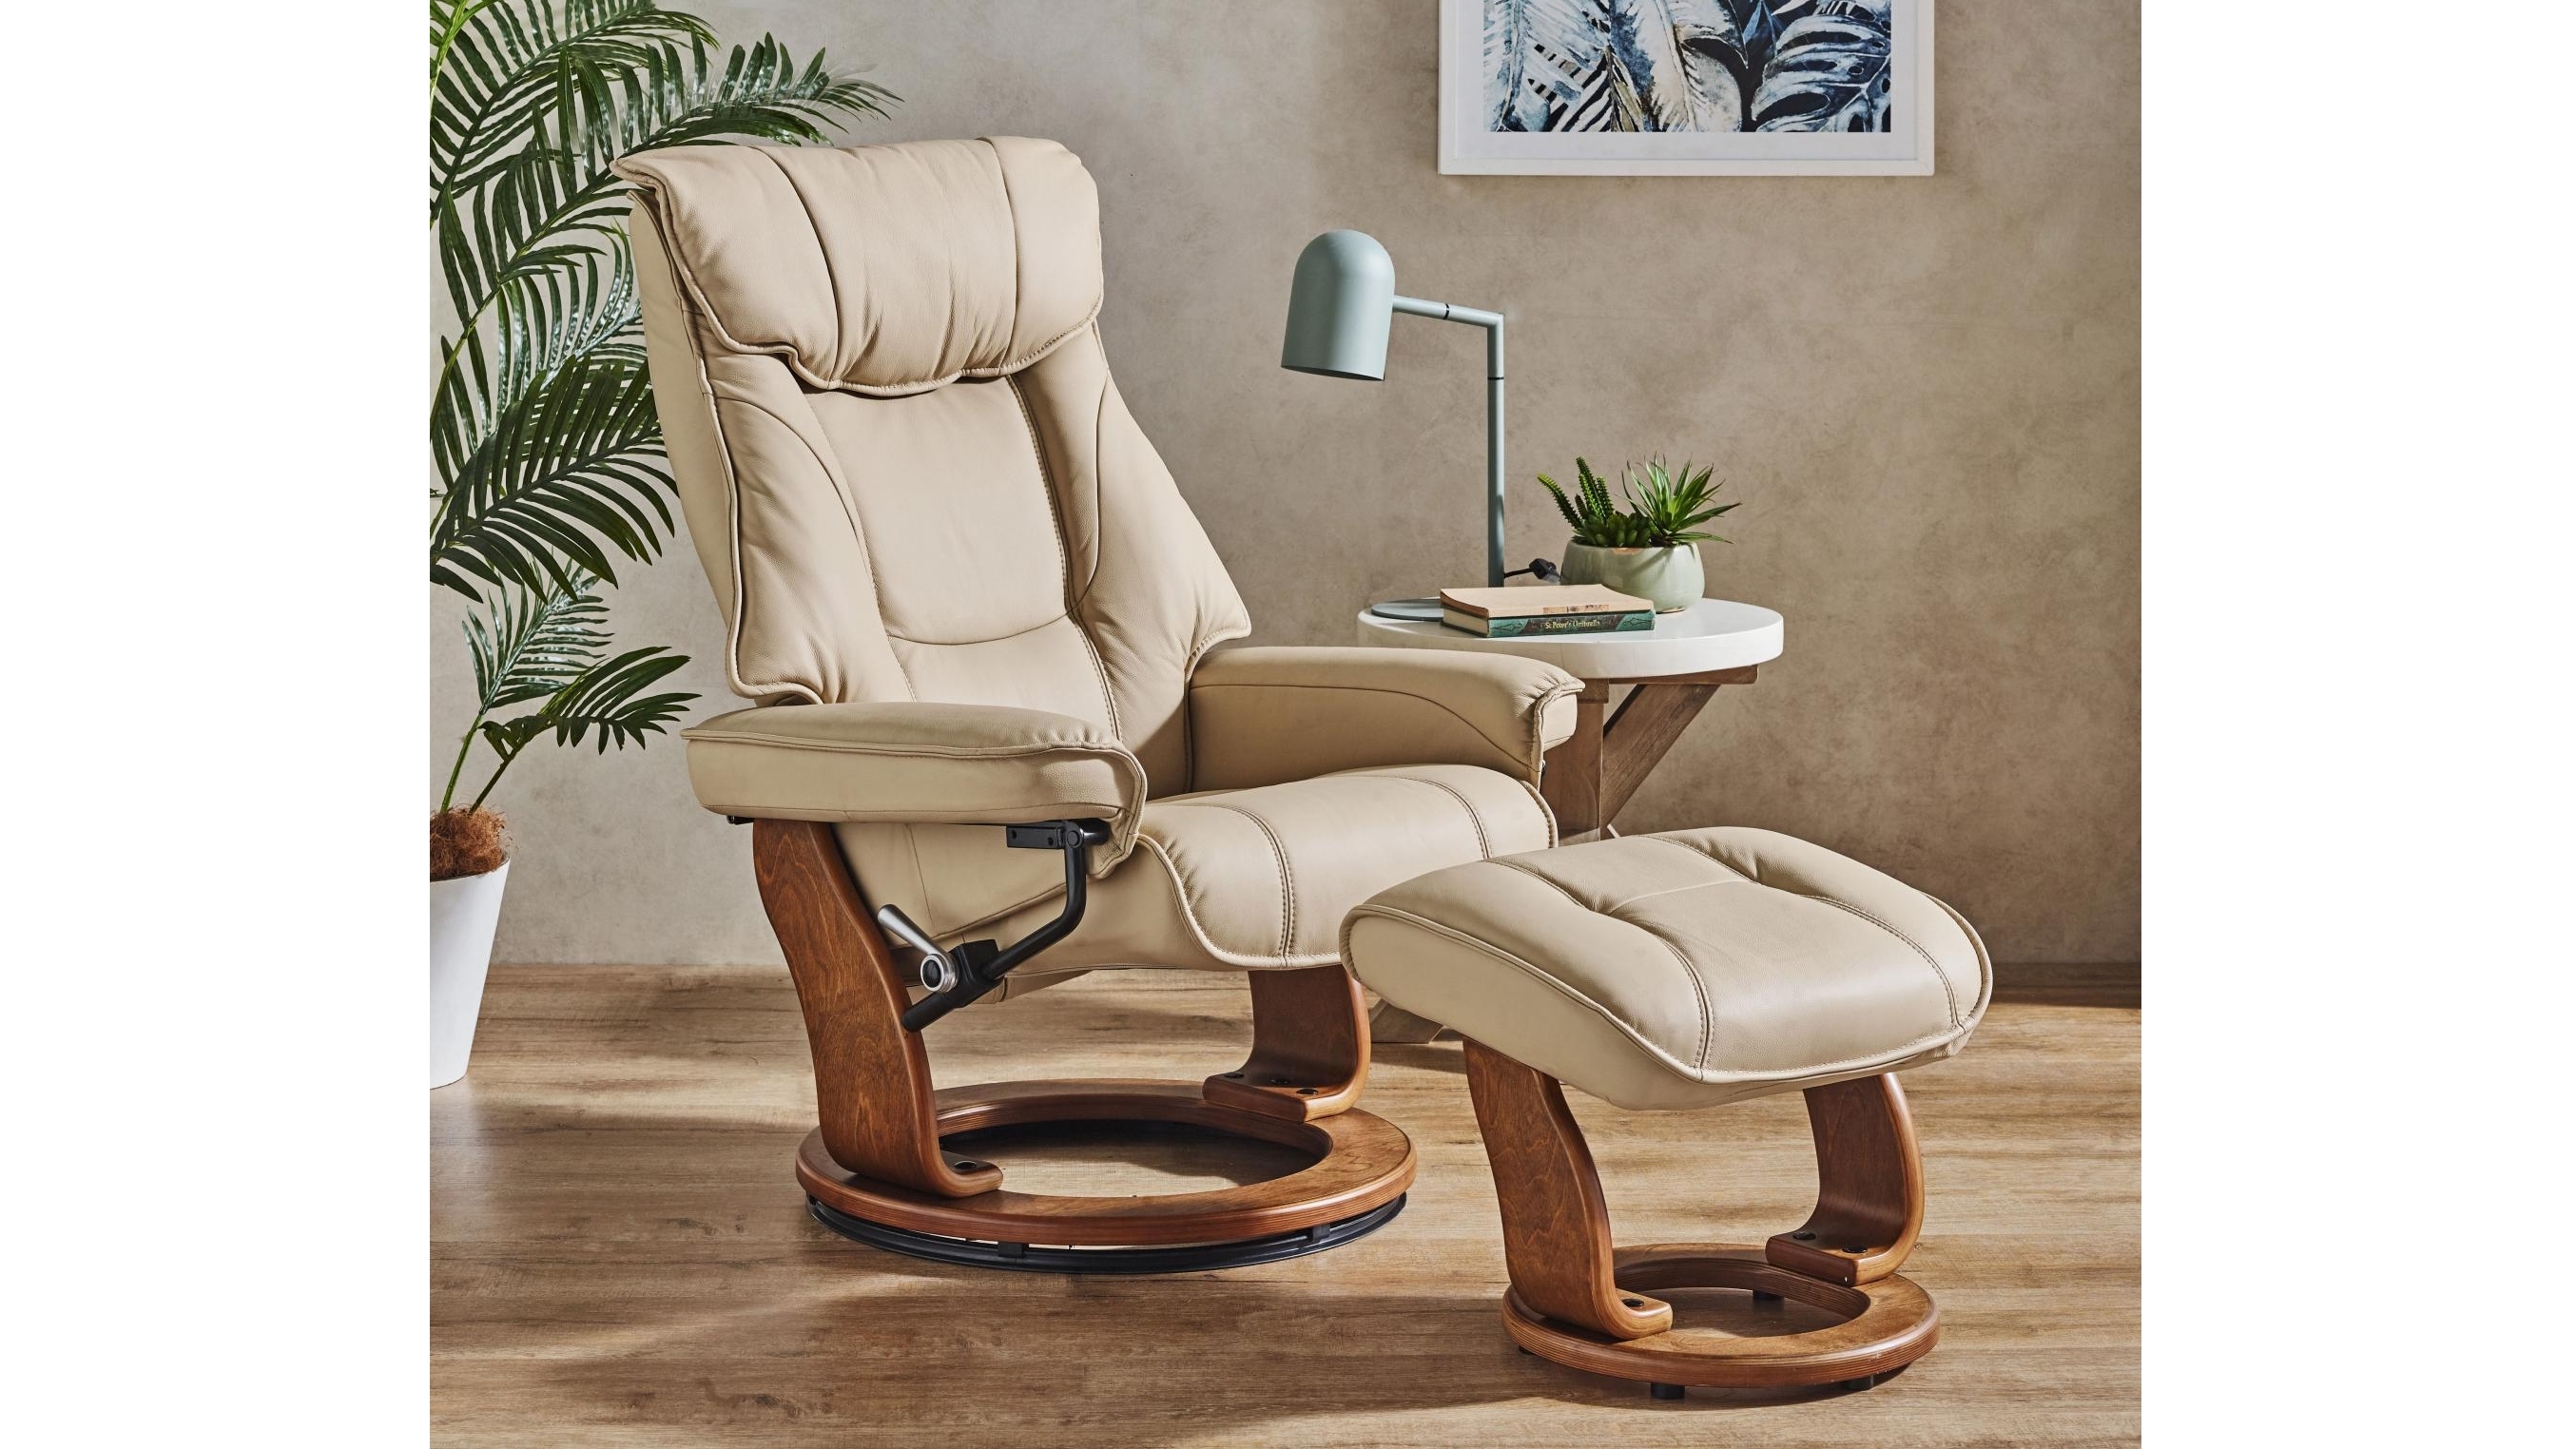 Orebro Leather Recliner Chair And, Reclining Chair With Ottoman Leather